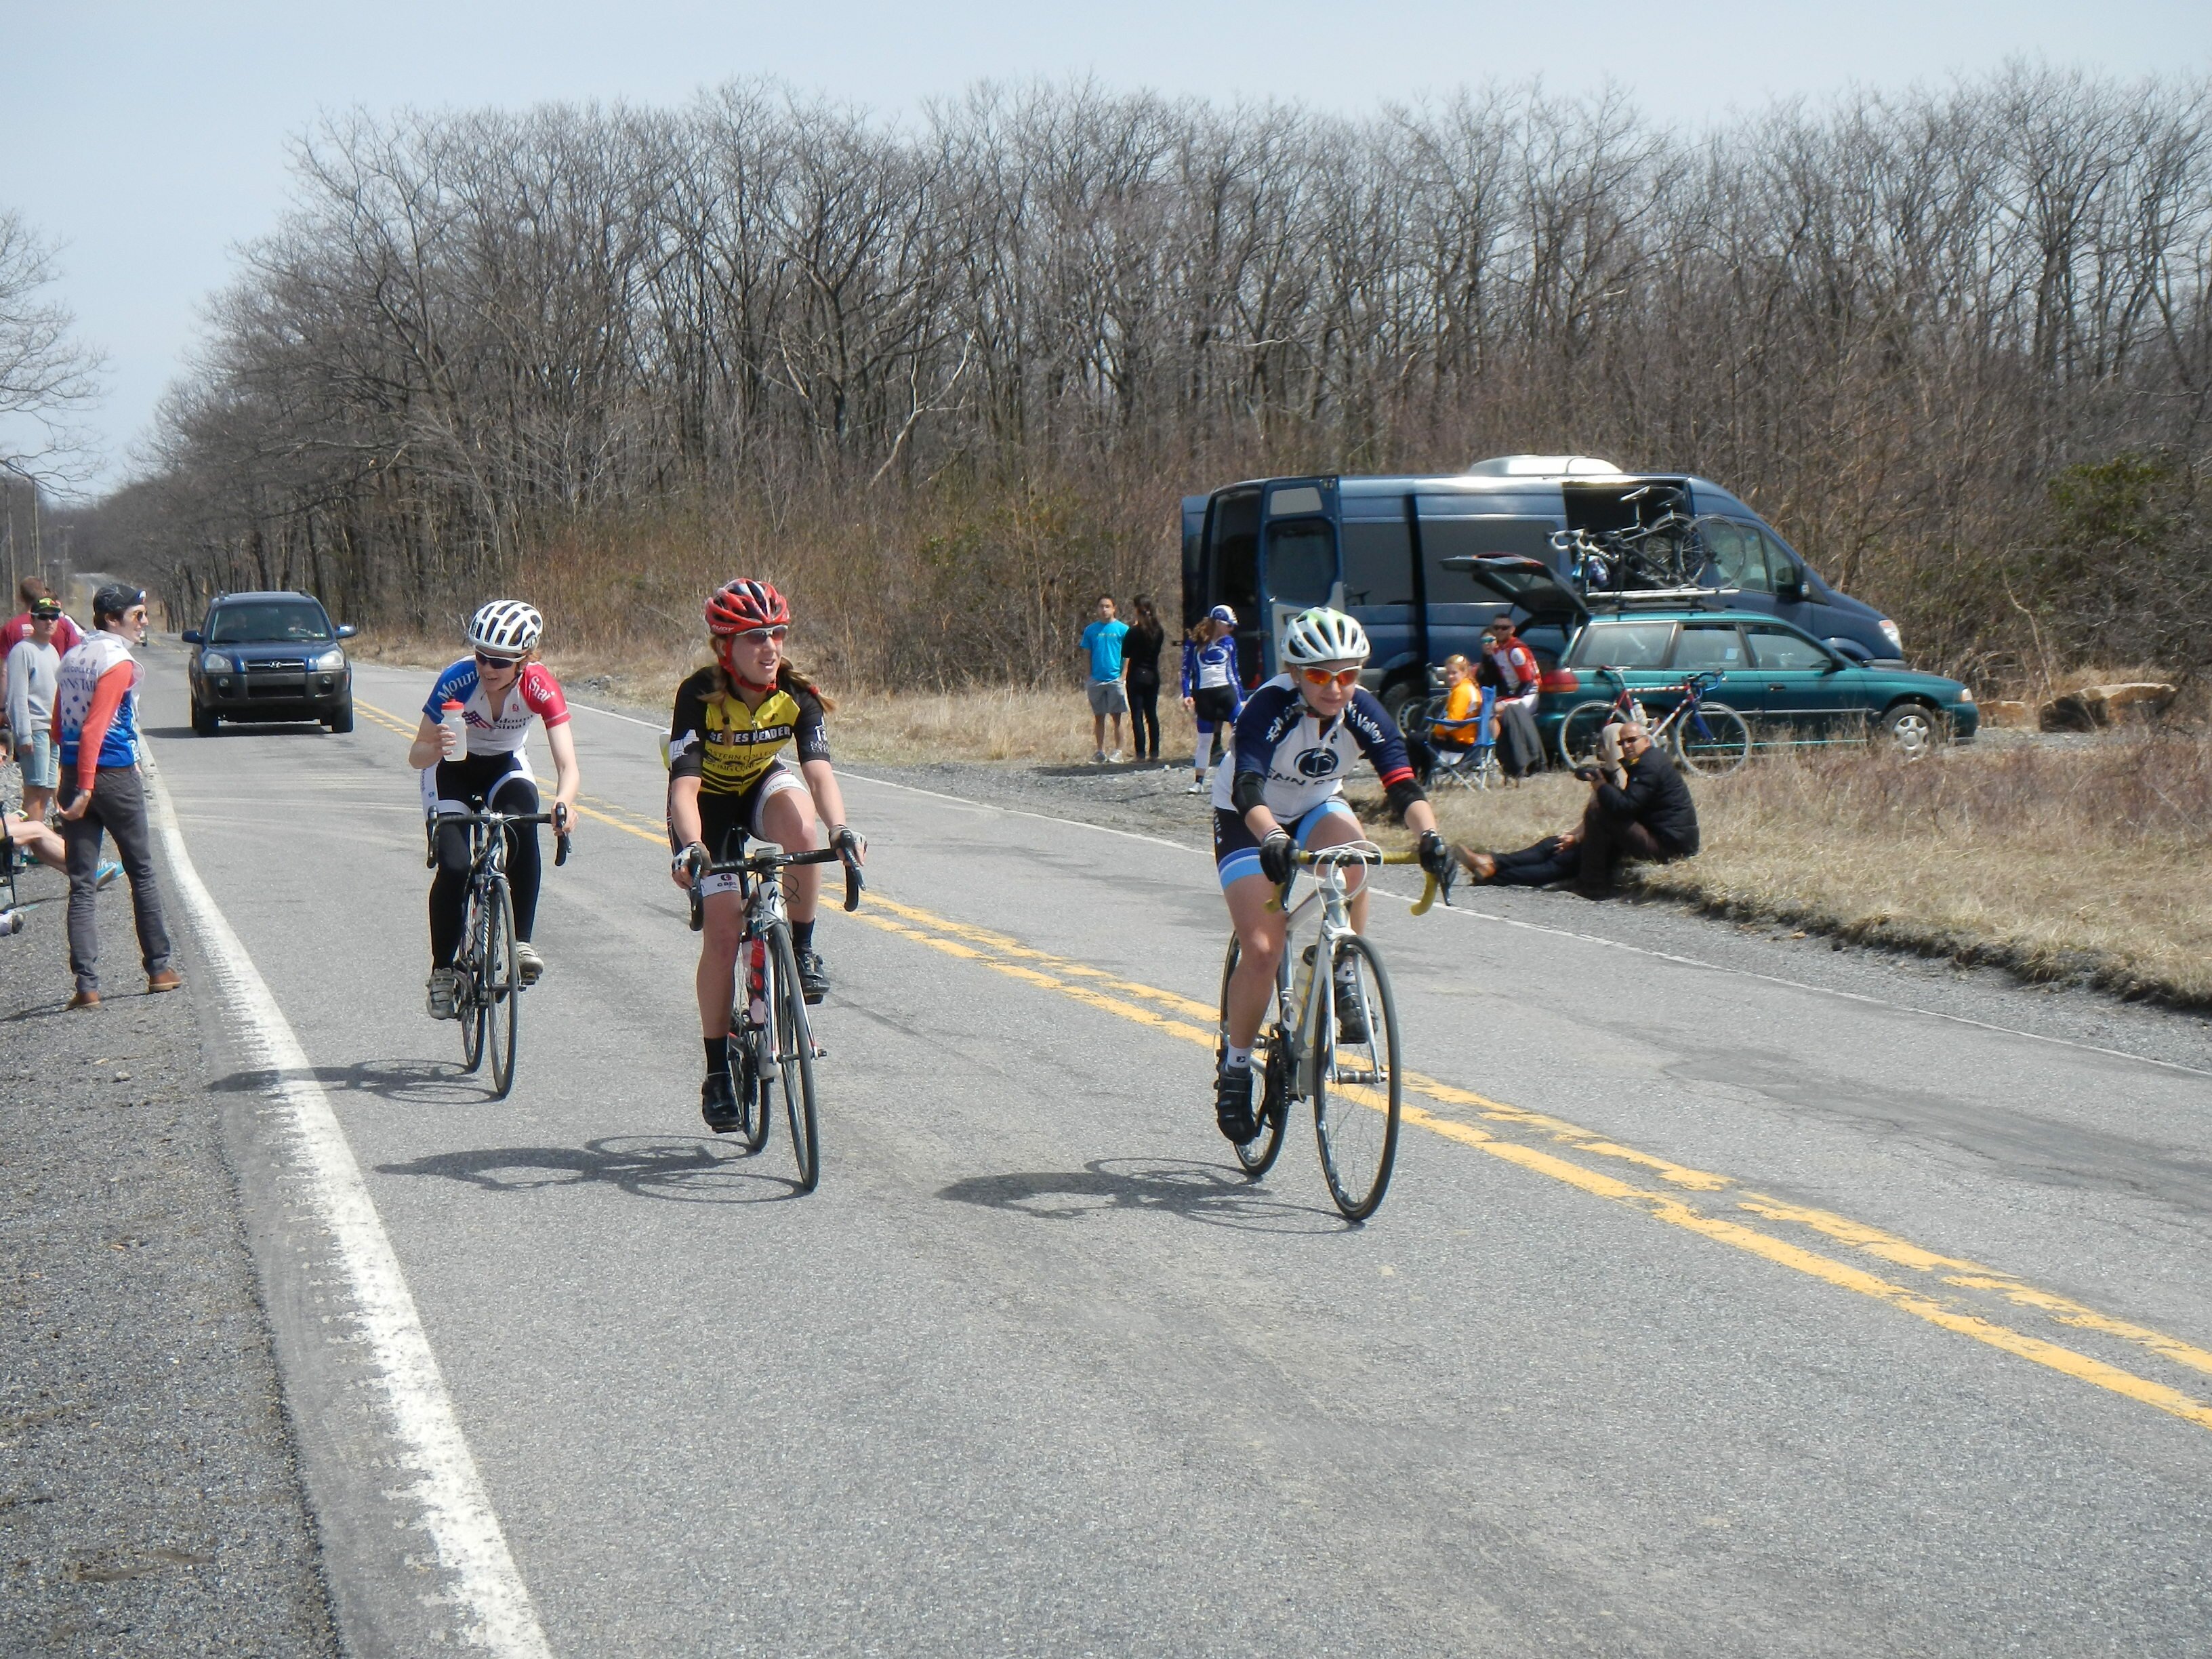 Rose Long of Icahn School of Medicine, Shaena Berlin of Massachusetts Institute of Technology, Monica Volk of Penn State Lehigh Valley- all of them mere mortals at the top of Saturday's final climb in the road race (Photo by Andrew Black)